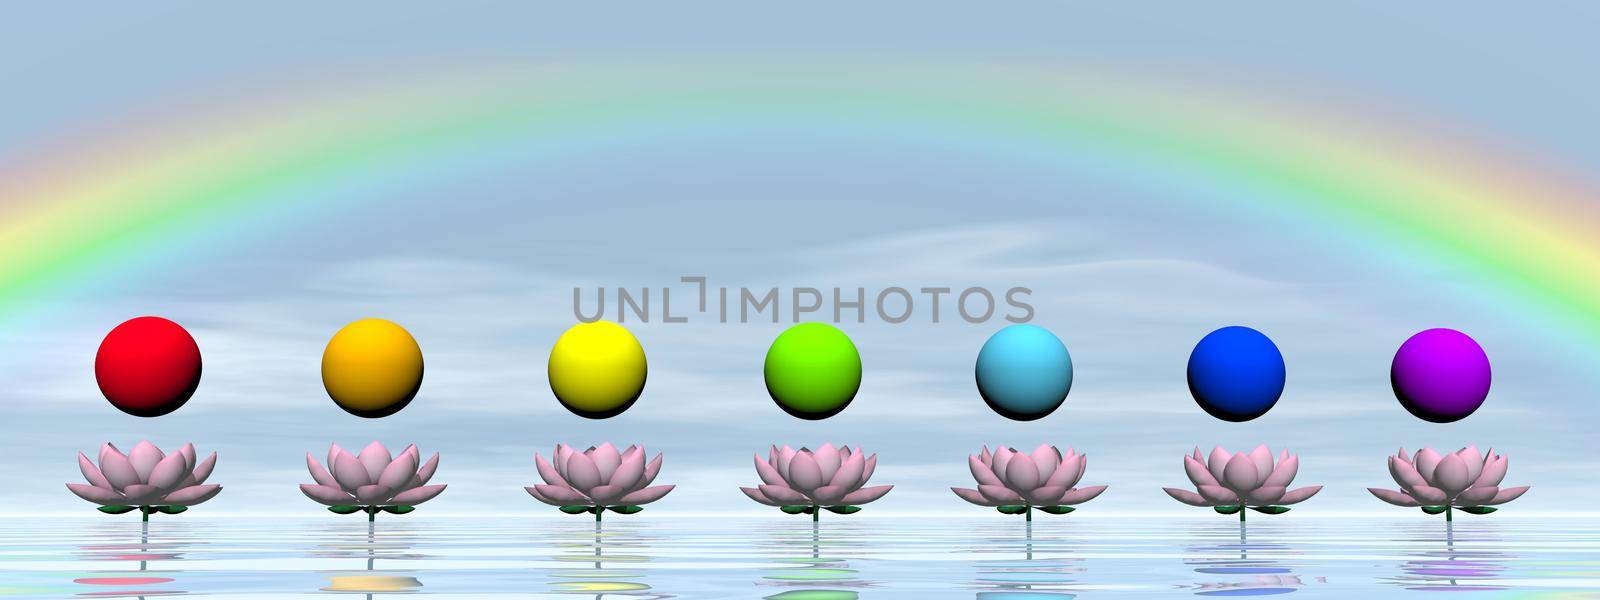 Colorful spheres for chakras upon beautiful lily flowers and water by day with rainbow